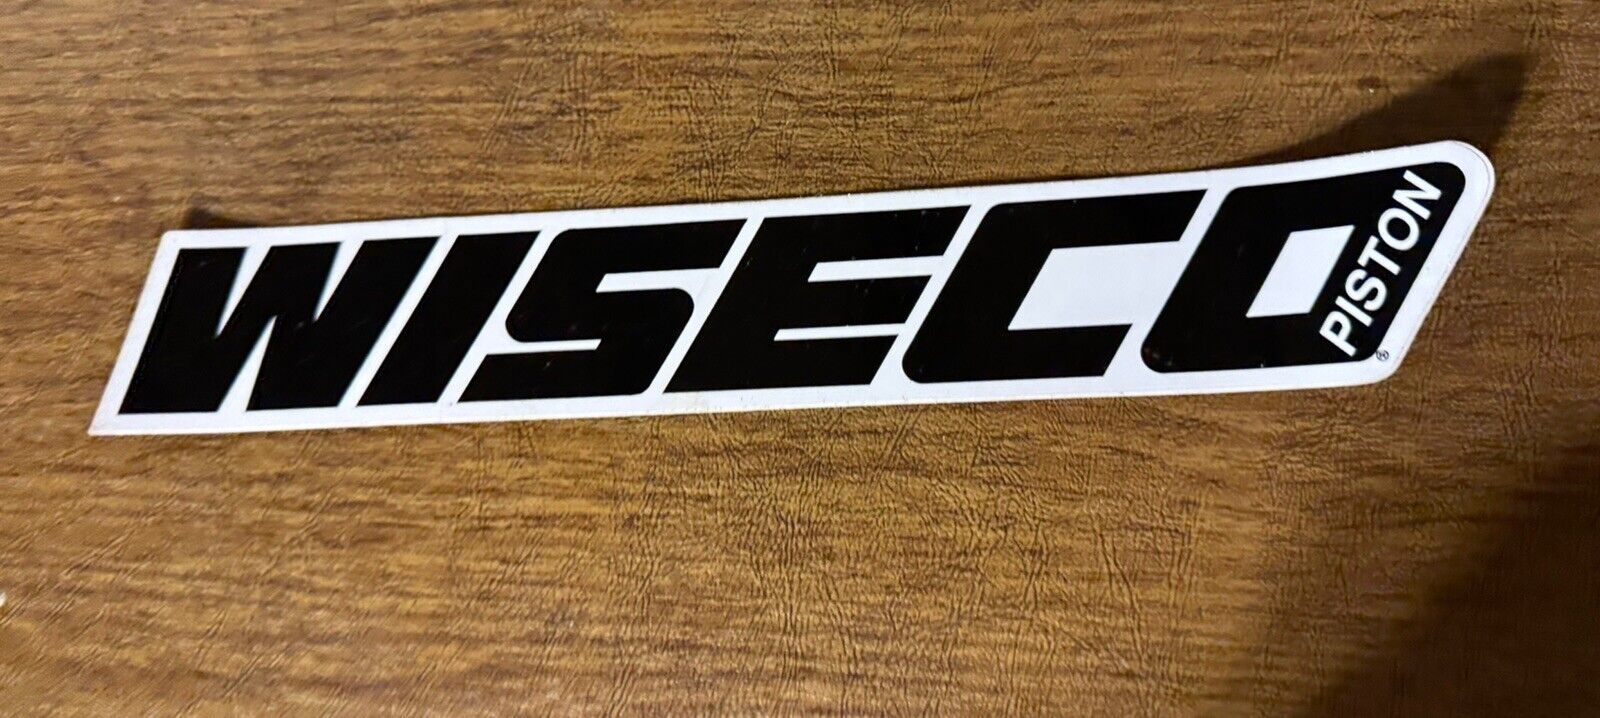 12” x 2” Wiseco Piston Products Black and White Sticker. Nice Looking Sticker.